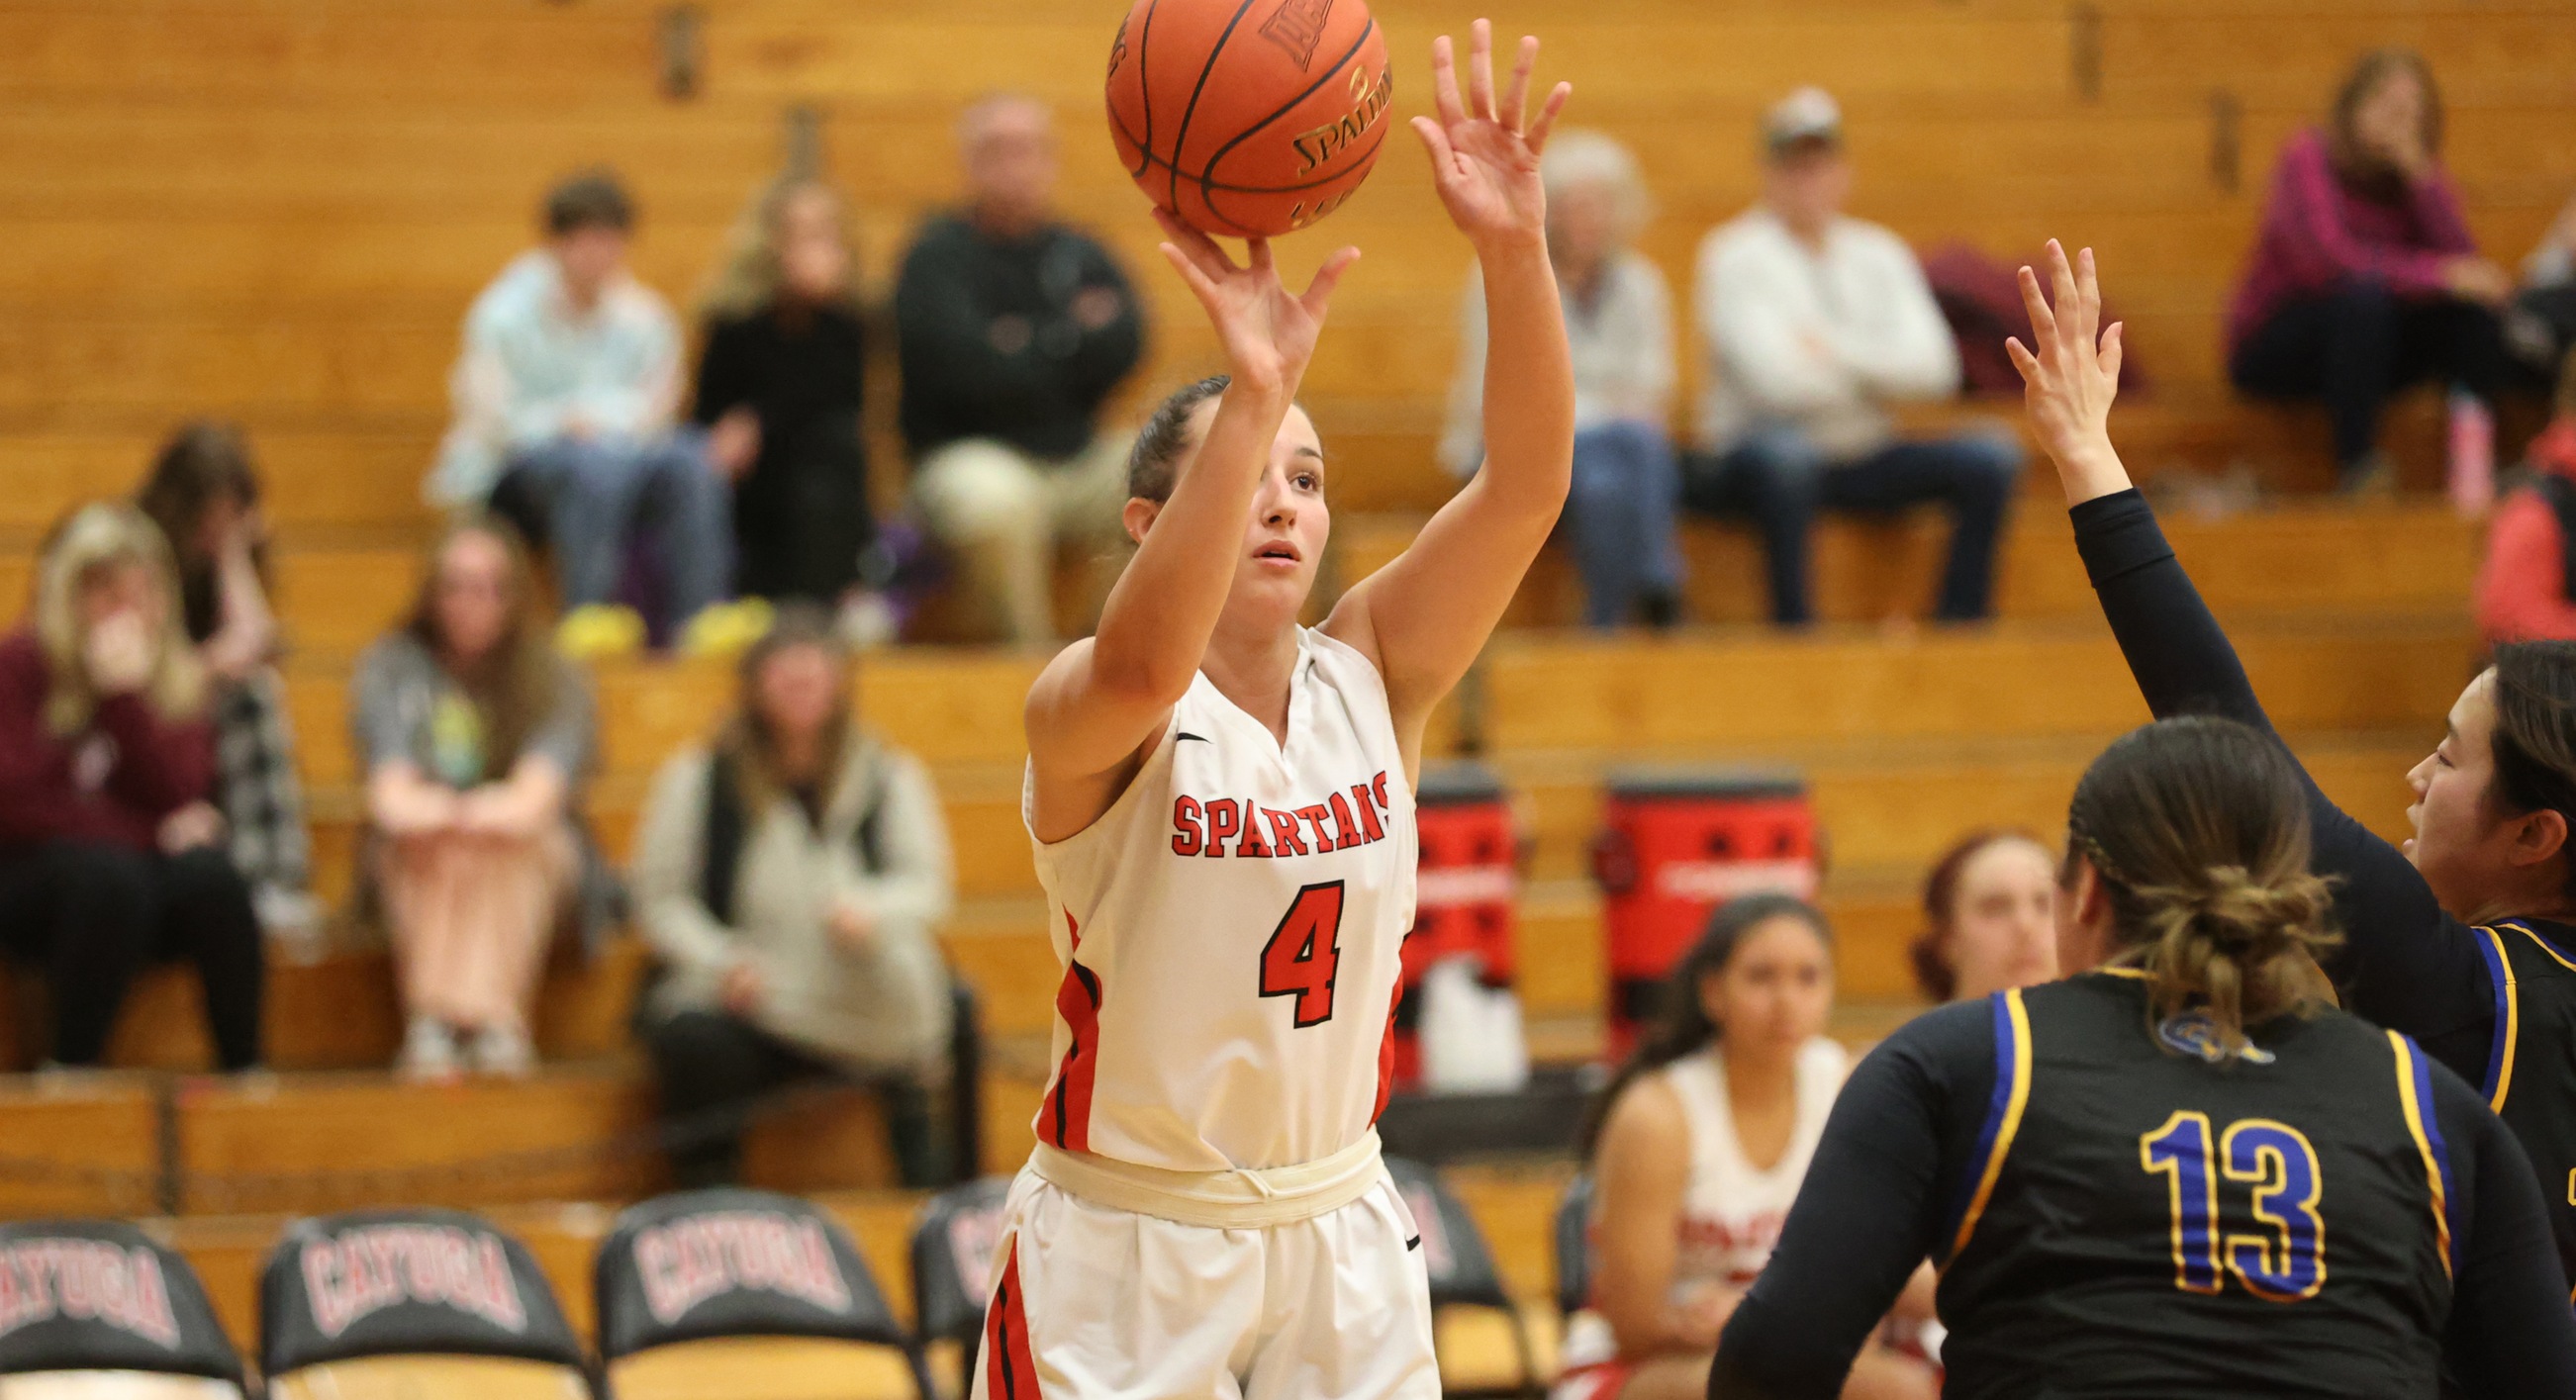 Maddy Weed led all scorers Wednesday with 13 points in the Spartans' win.